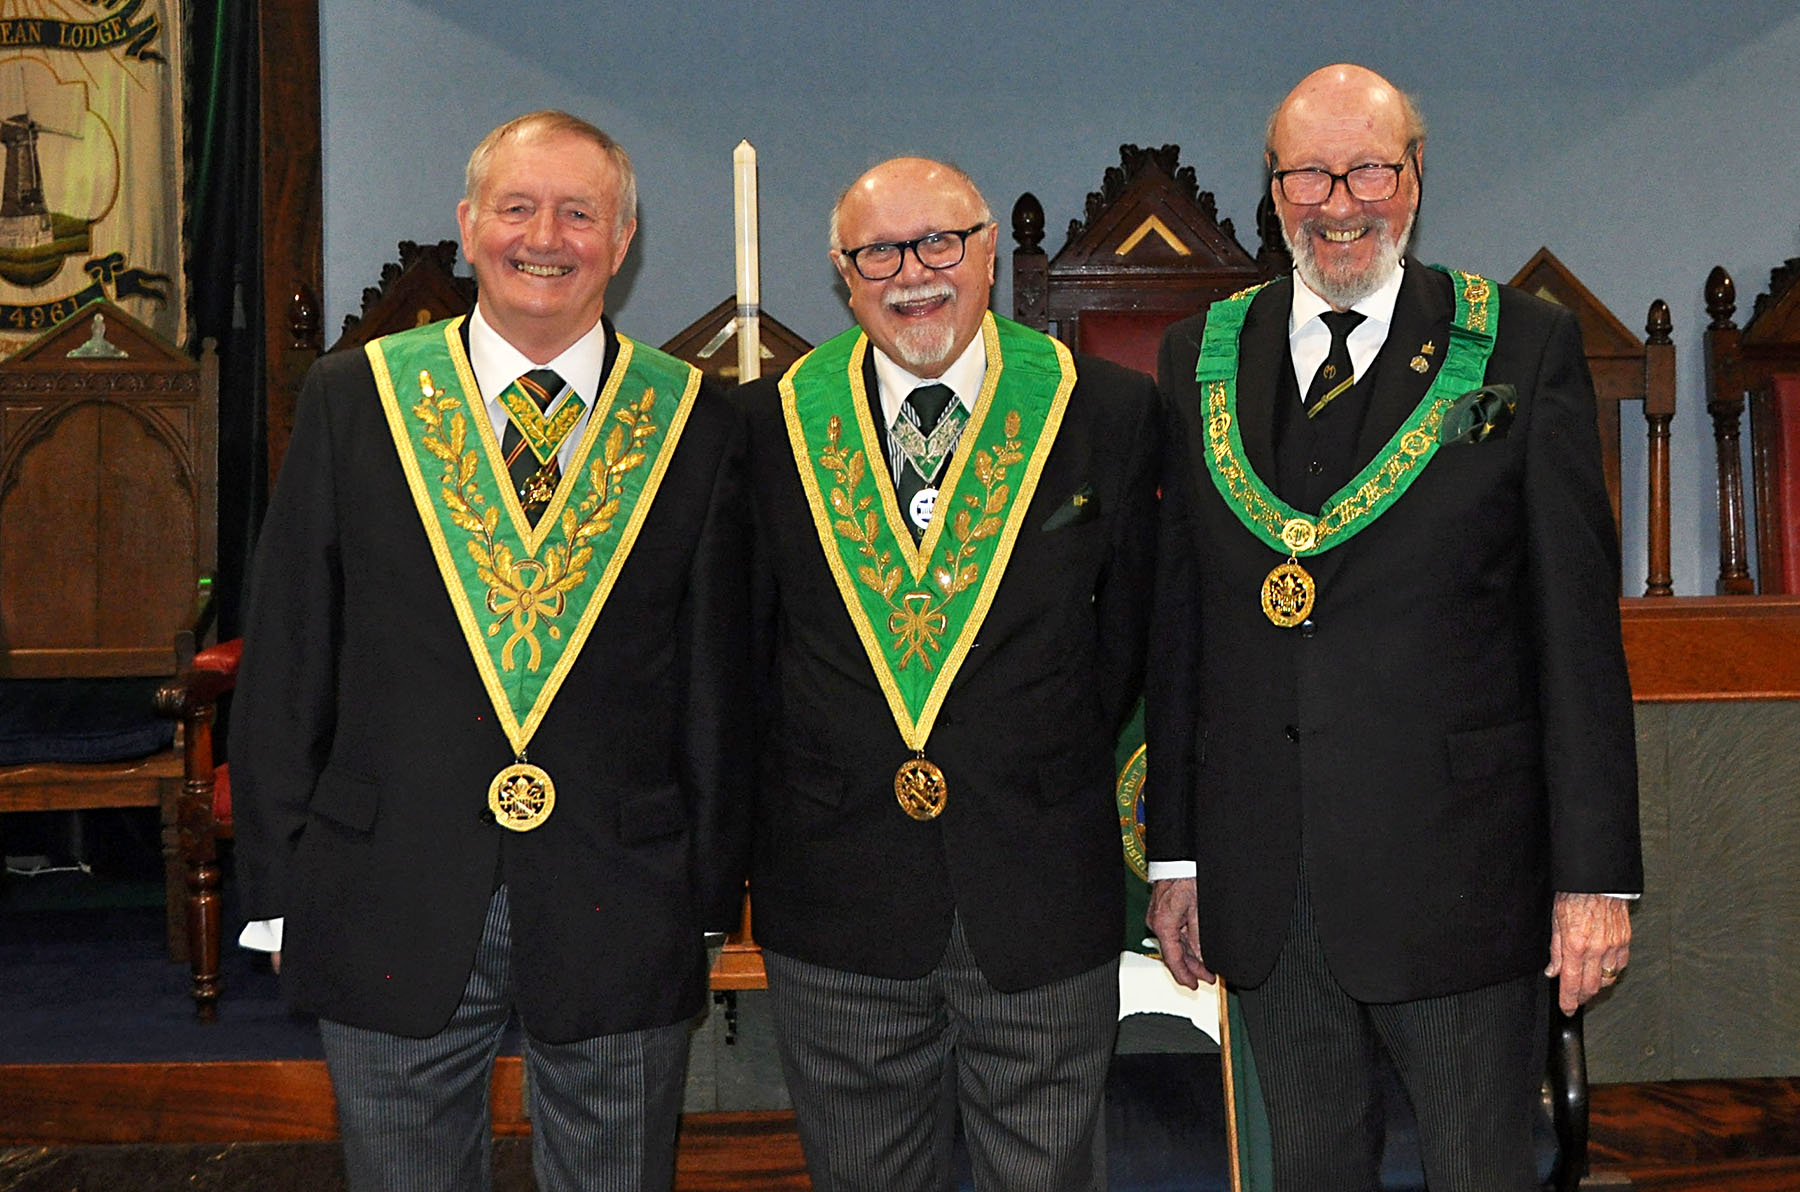 The DGP for Sussex R.W. Bro. Gene Earland with W.Bro Bob Tuthill (DDGP for Surrey) and R.W.Bro Clive Manuel  PDGM